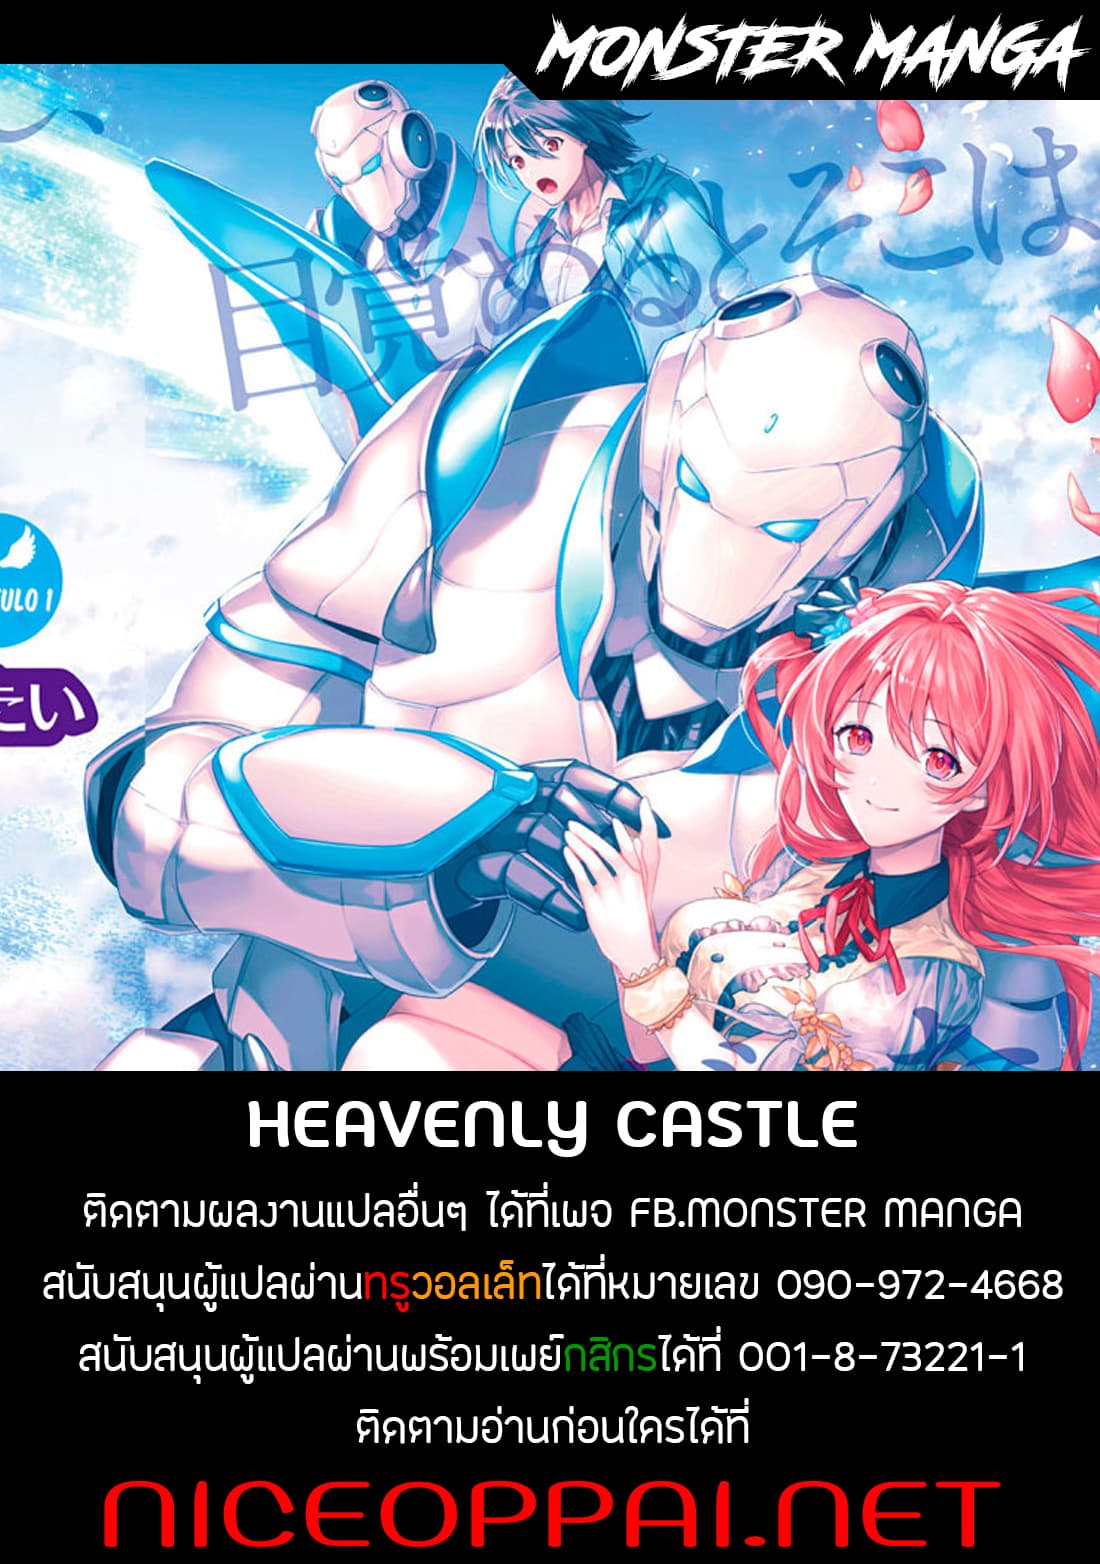 I Want To Play Happily In Another World Because I Got A Heavenly Castle3 (23)